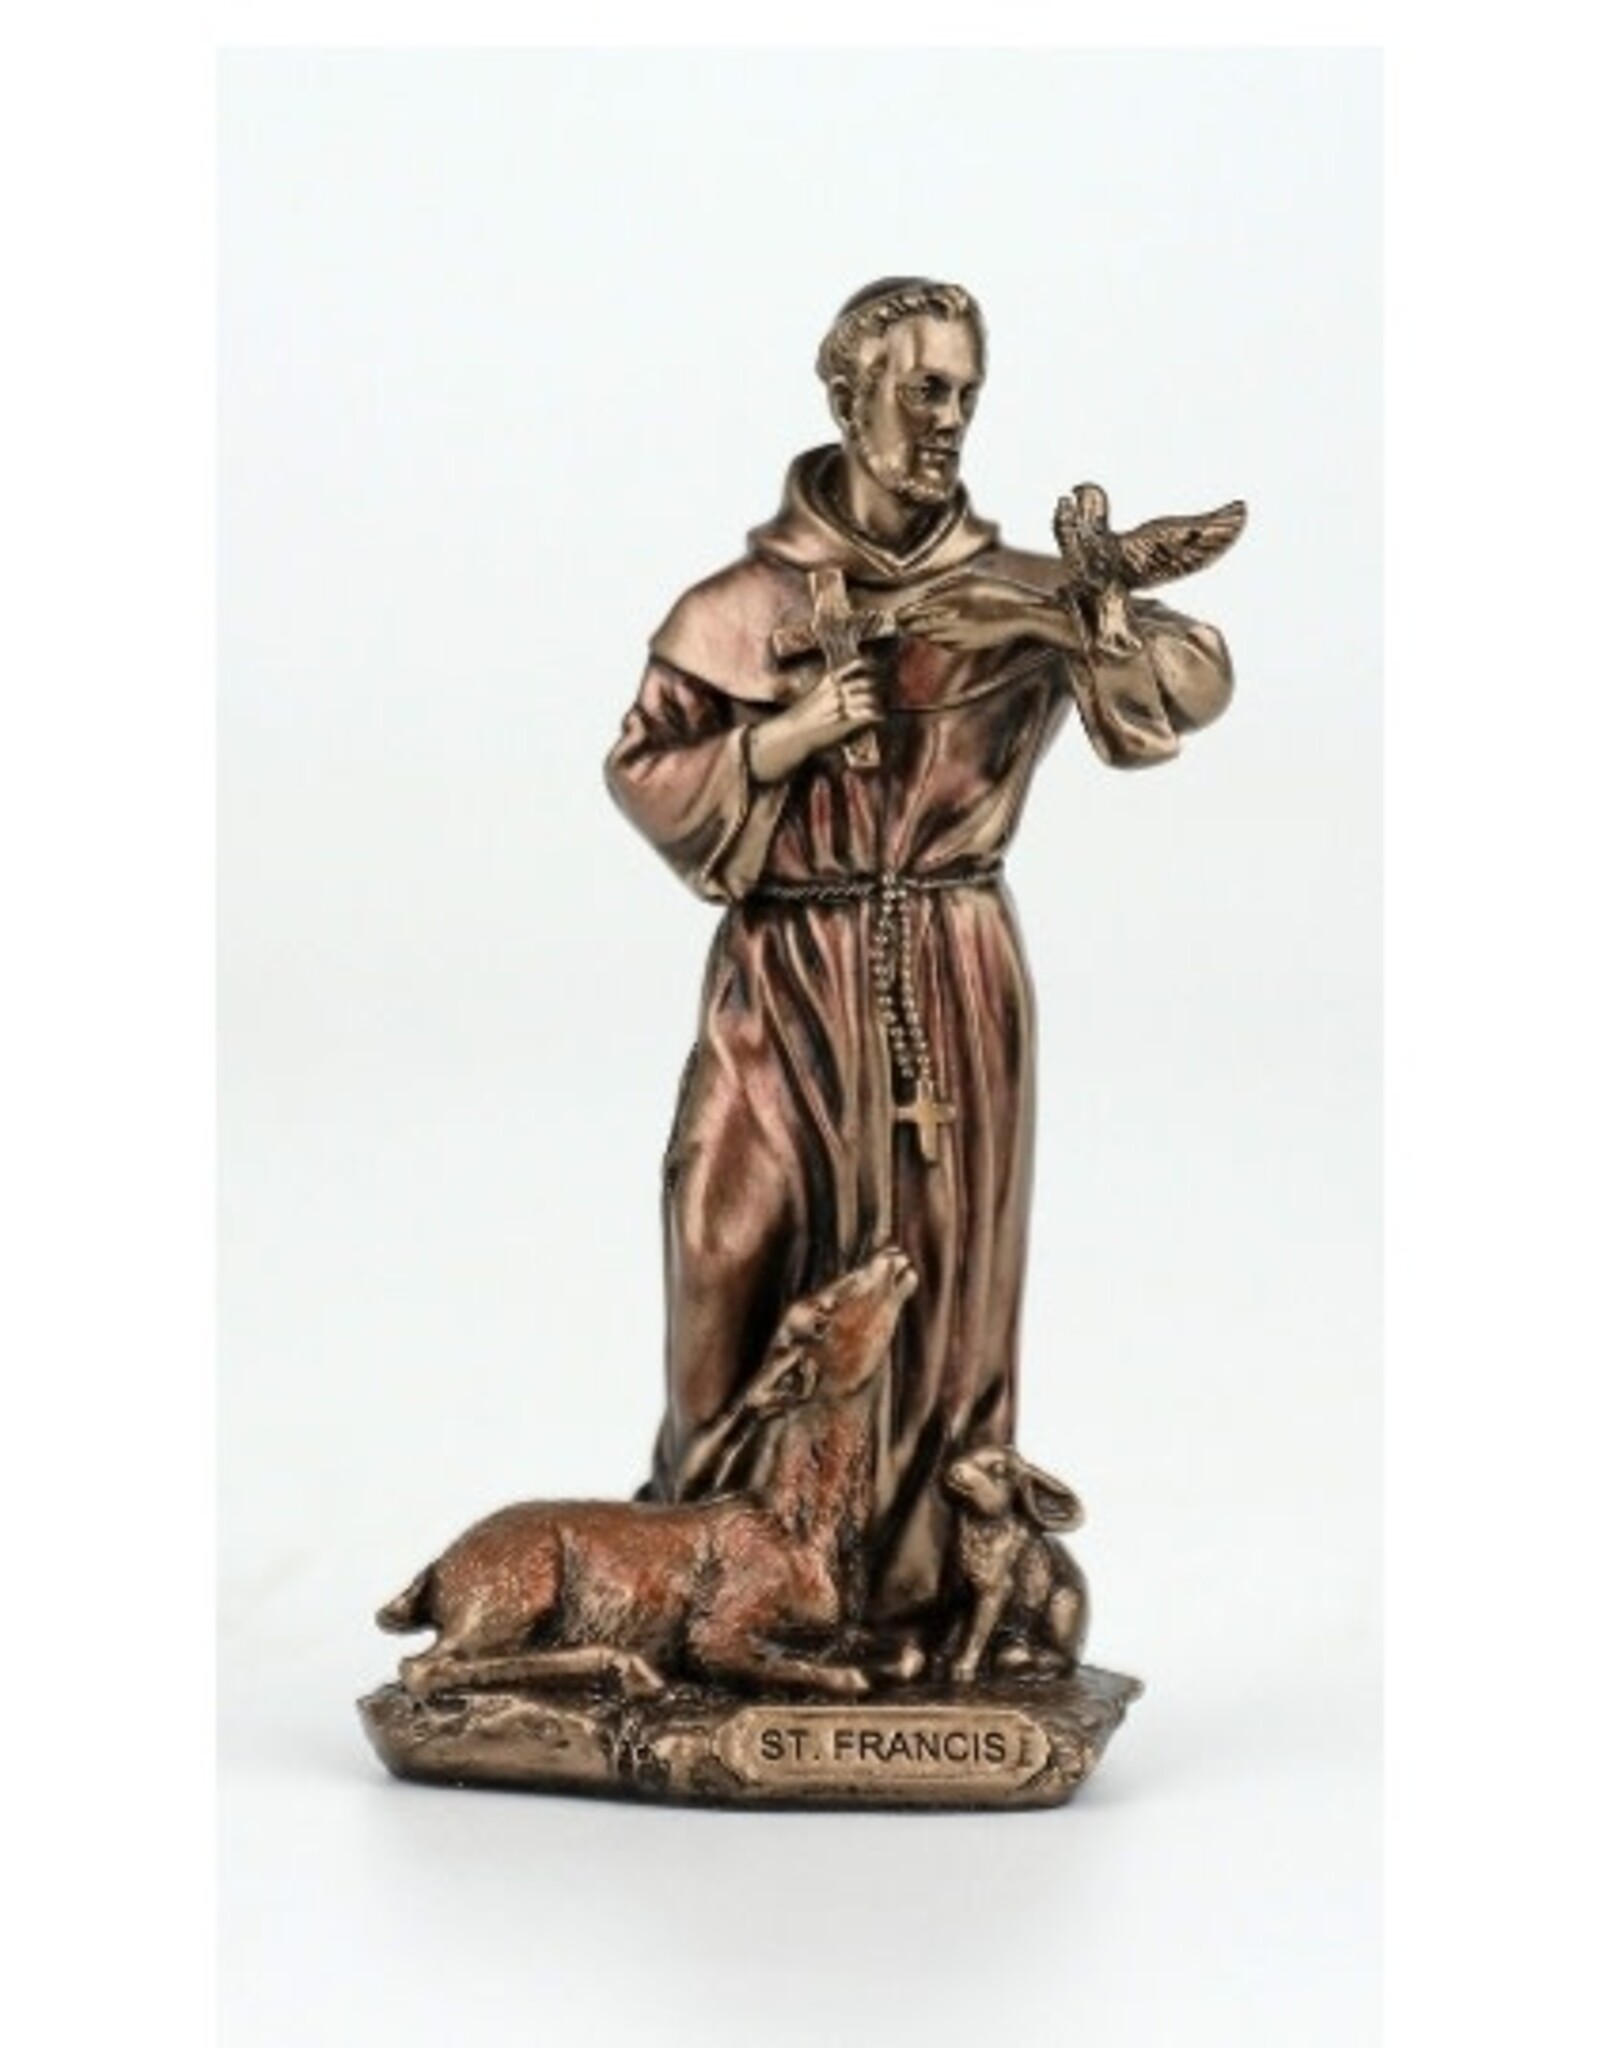 St. Francis of Assisi Statue 3.5"